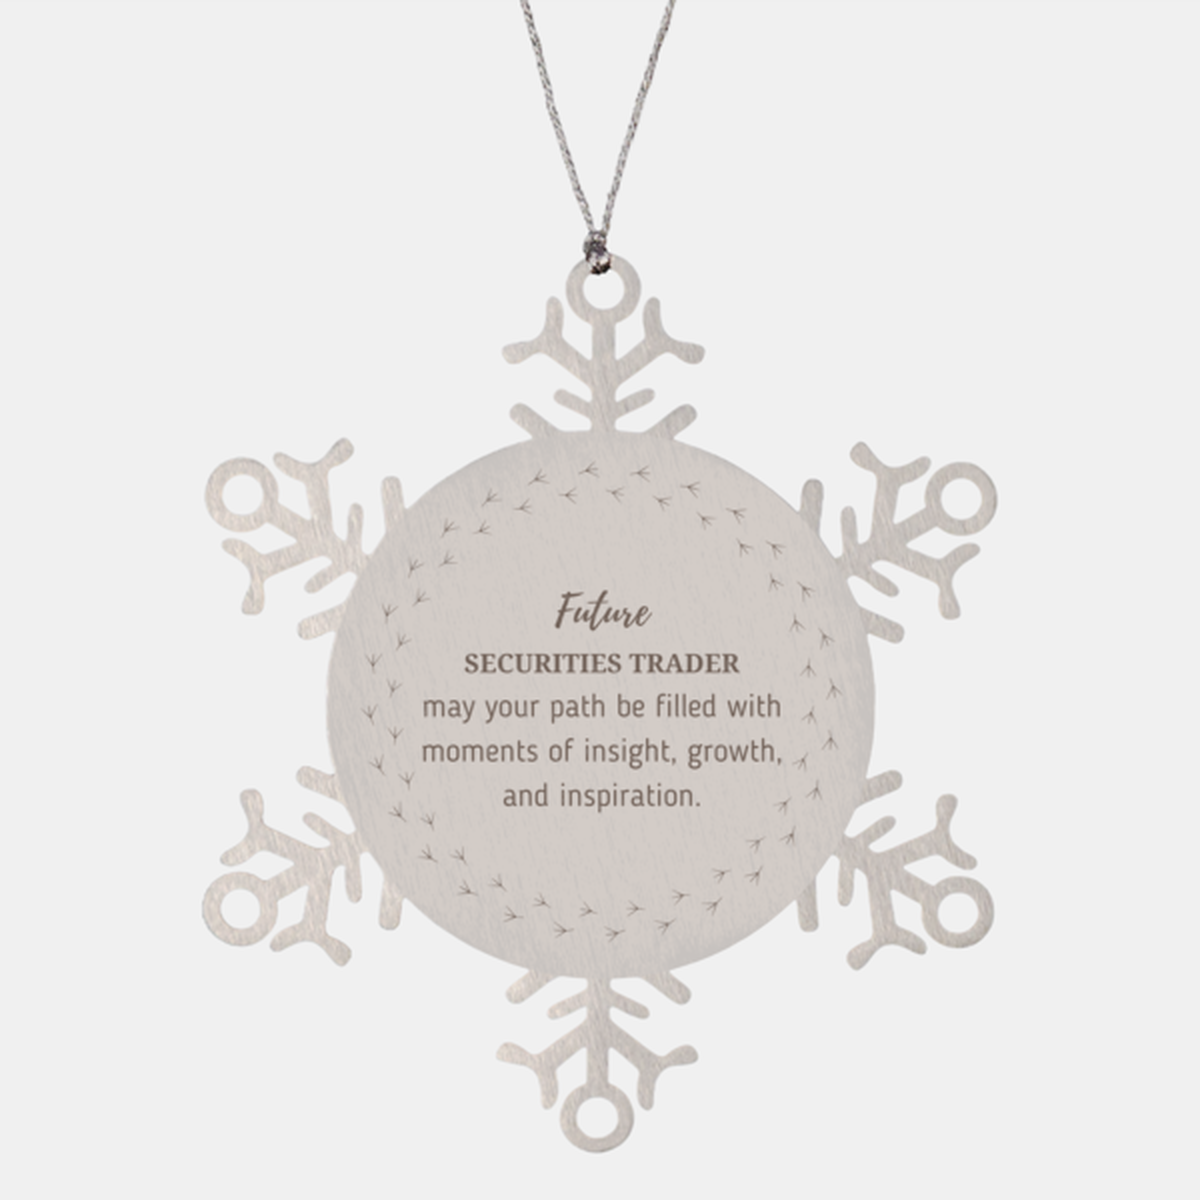 Future Securities Trader Gifts, May your path be filled with moments of insight, Graduation Gifts for New Securities Trader, Christmas Unique Snowflake Ornament For Men, Women, Friends